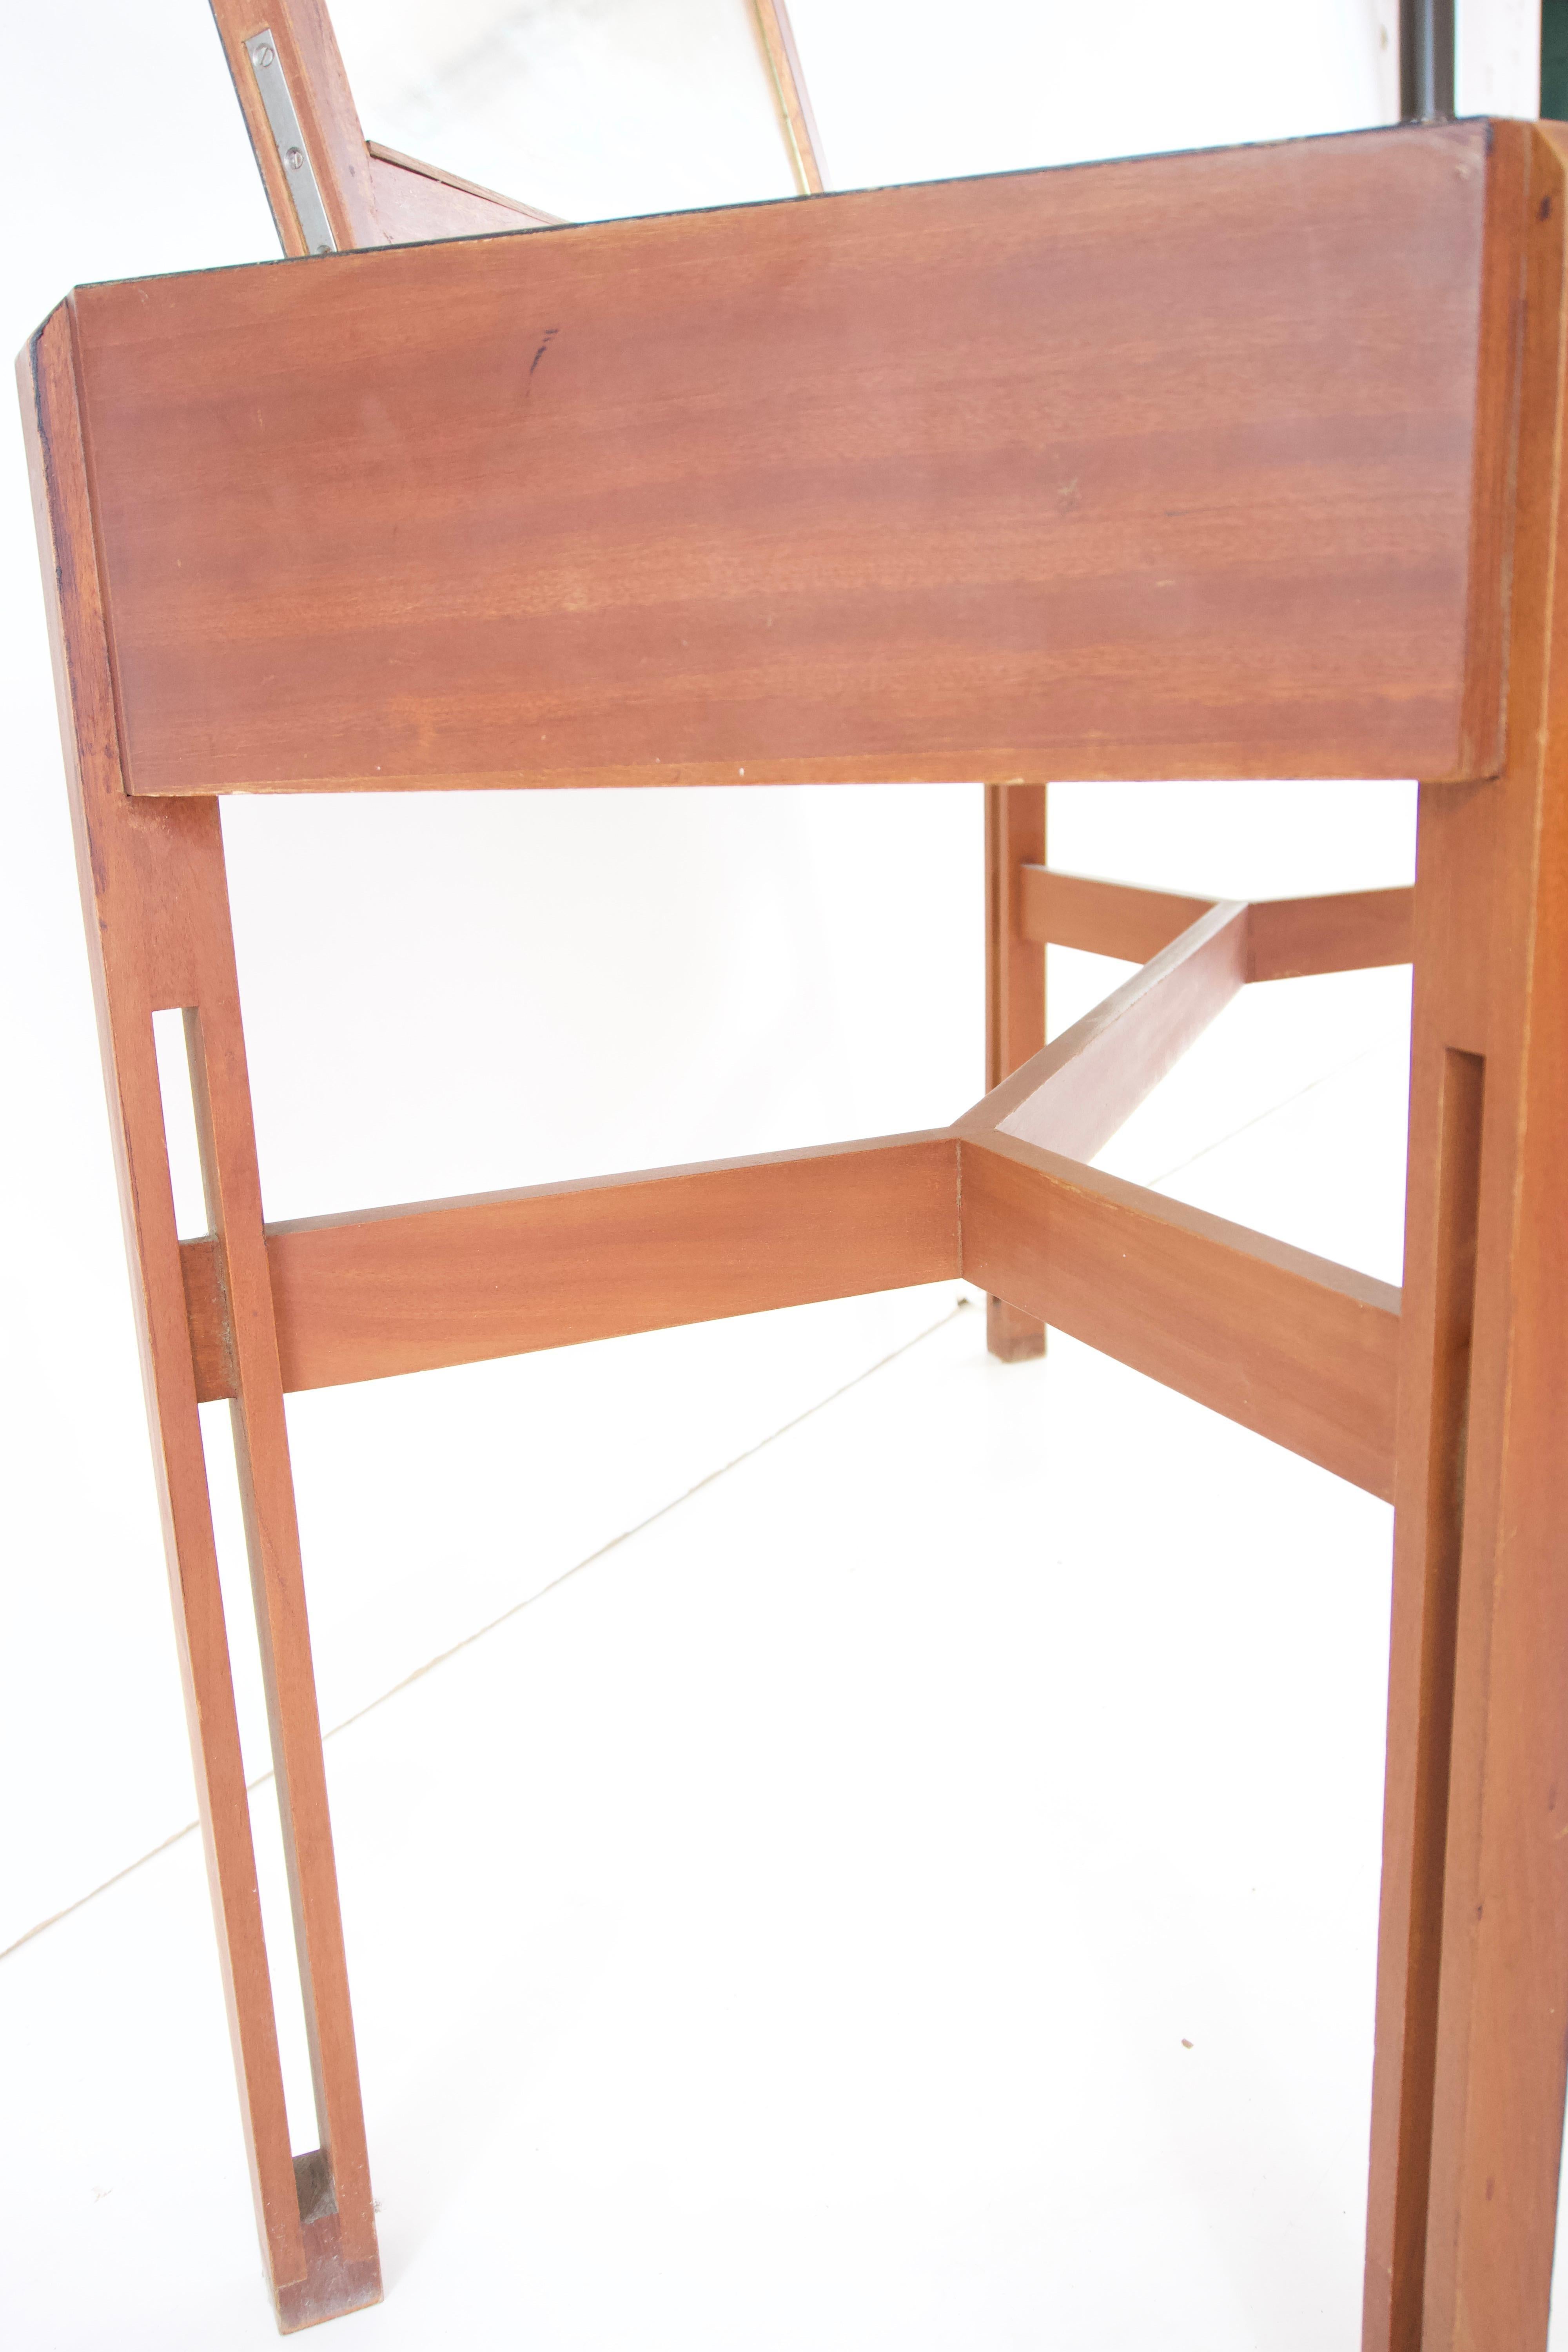 Ico Parisi Rare Large Wood and Laminate Desk with Mirror, Hotel Lorena, 1959.60 For Sale 11